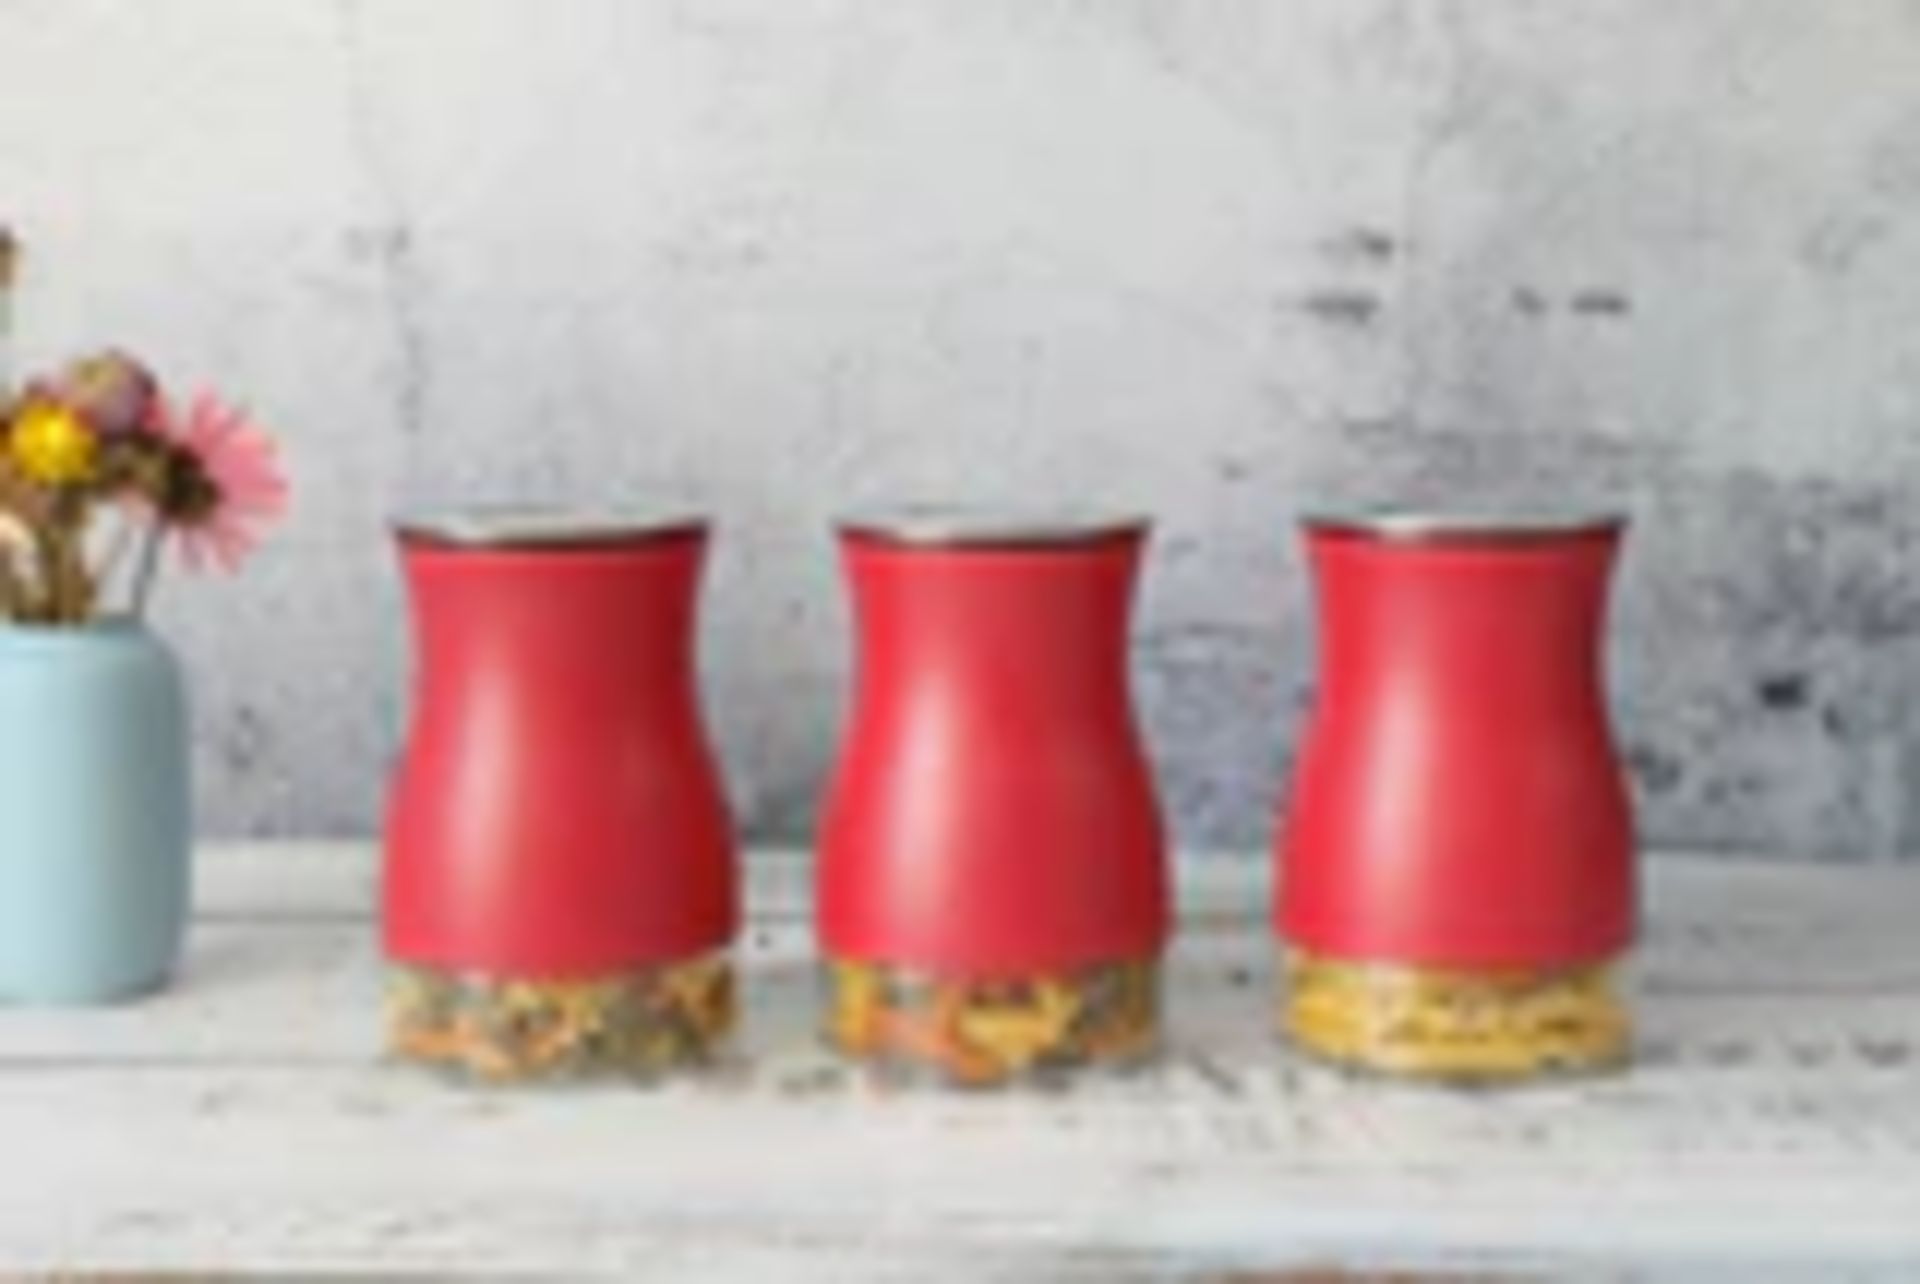 Brand New 3 Pc Kitchen Canisters Red - Image 2 of 2